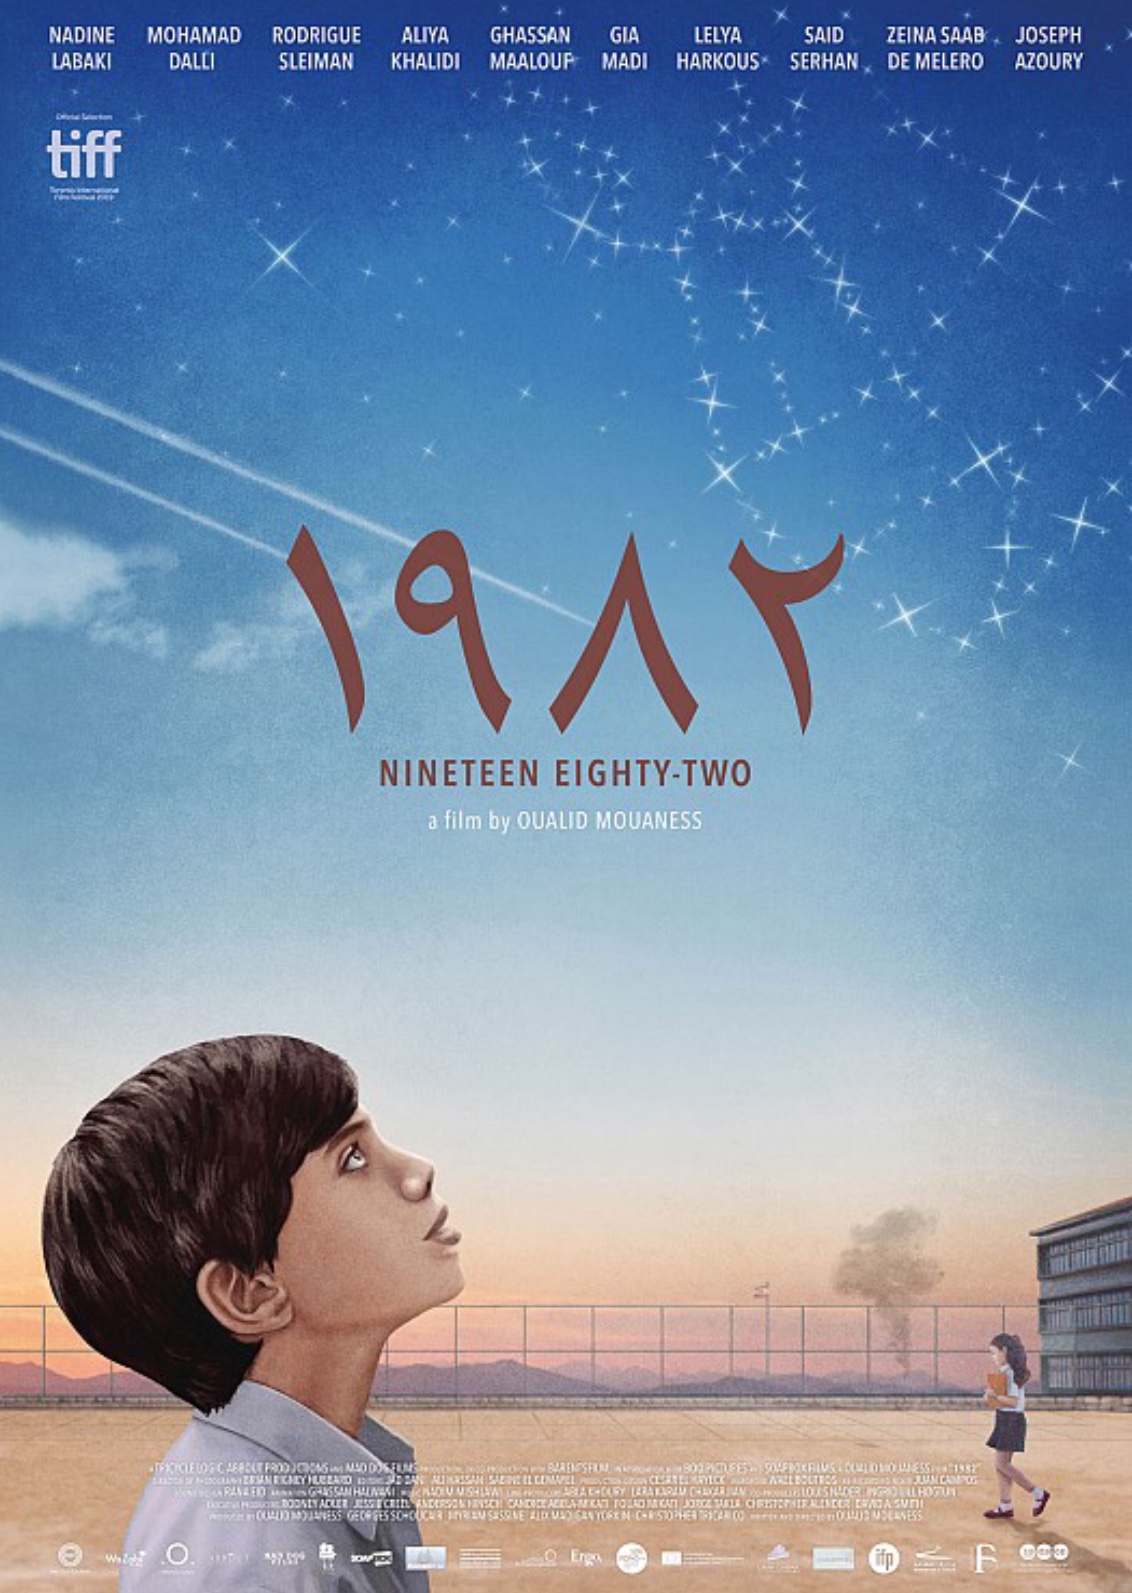 Movie poster for 1982; side view of a young boy looking at a constellation in the bright blue sky, a lone girl walks in the distant, dry field.